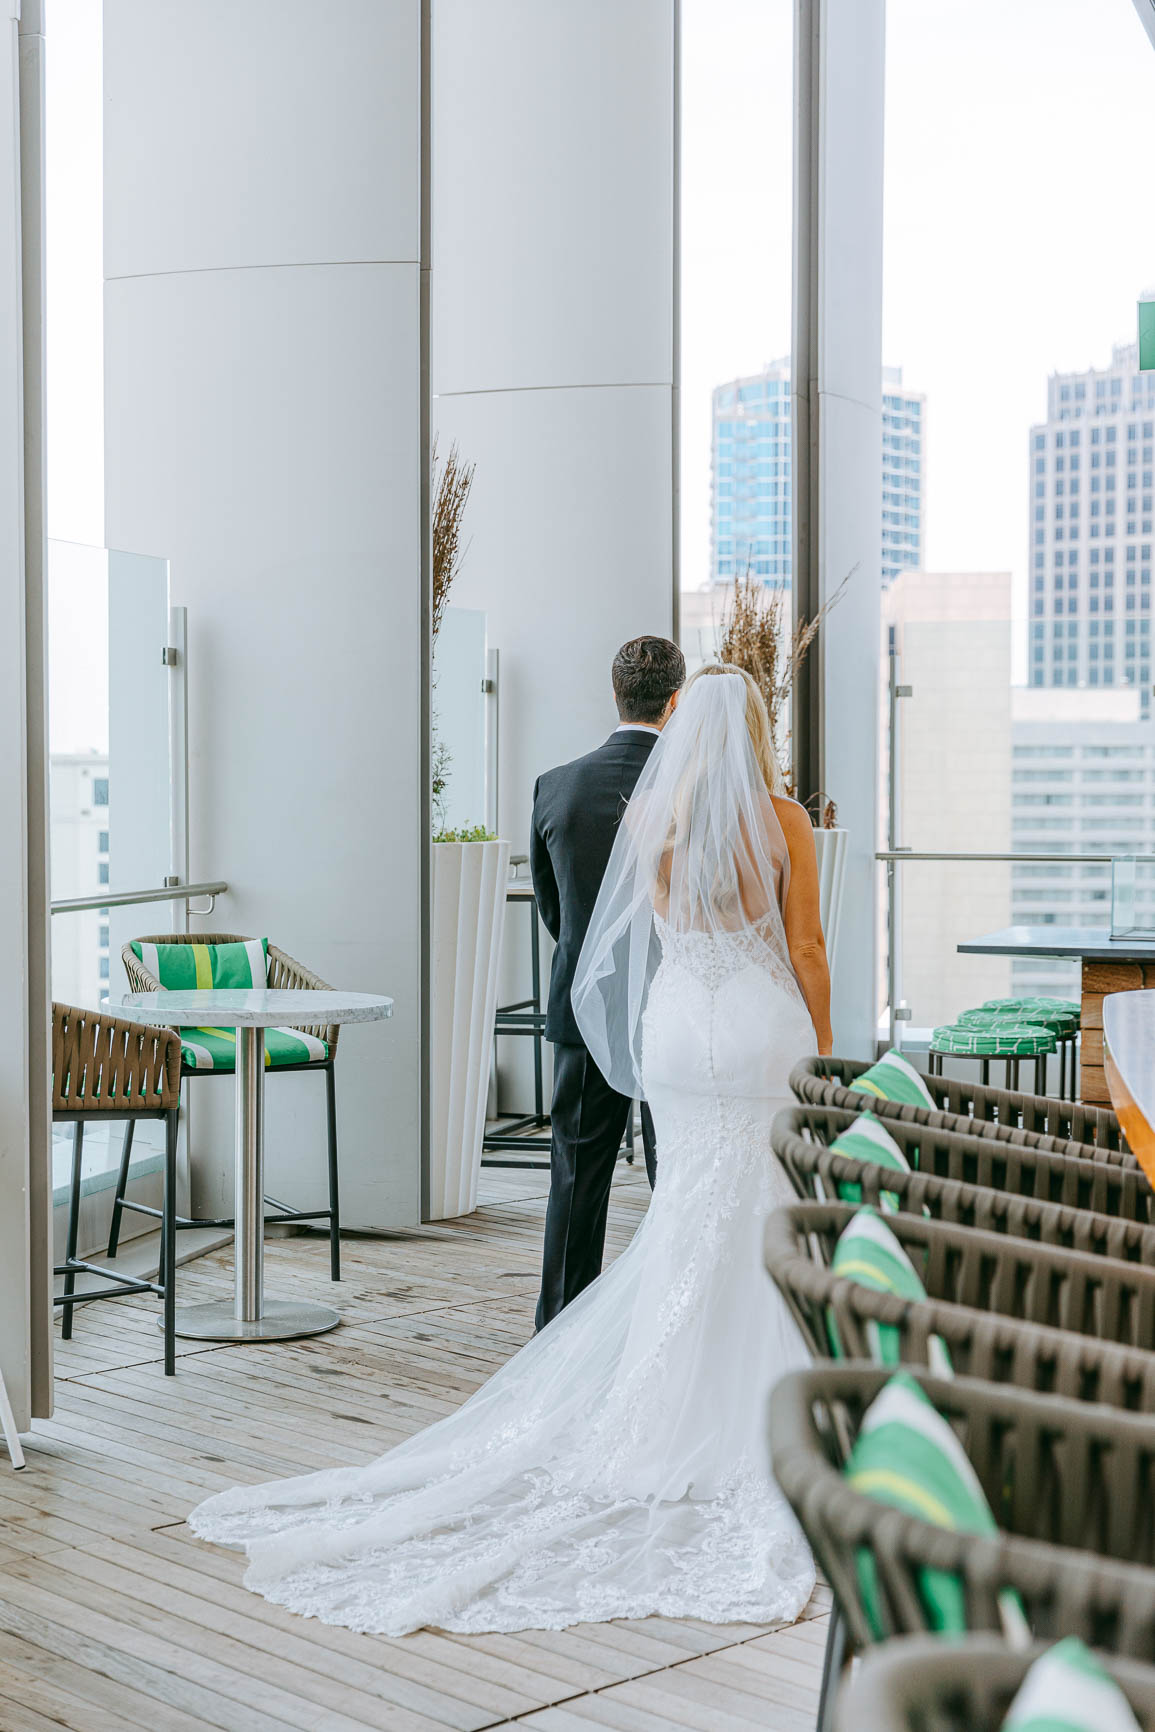 Bride and groom first look at merchant & trade rooftop in Charlotte nc shot by Nhieu Tang Photography | nhieutang.com